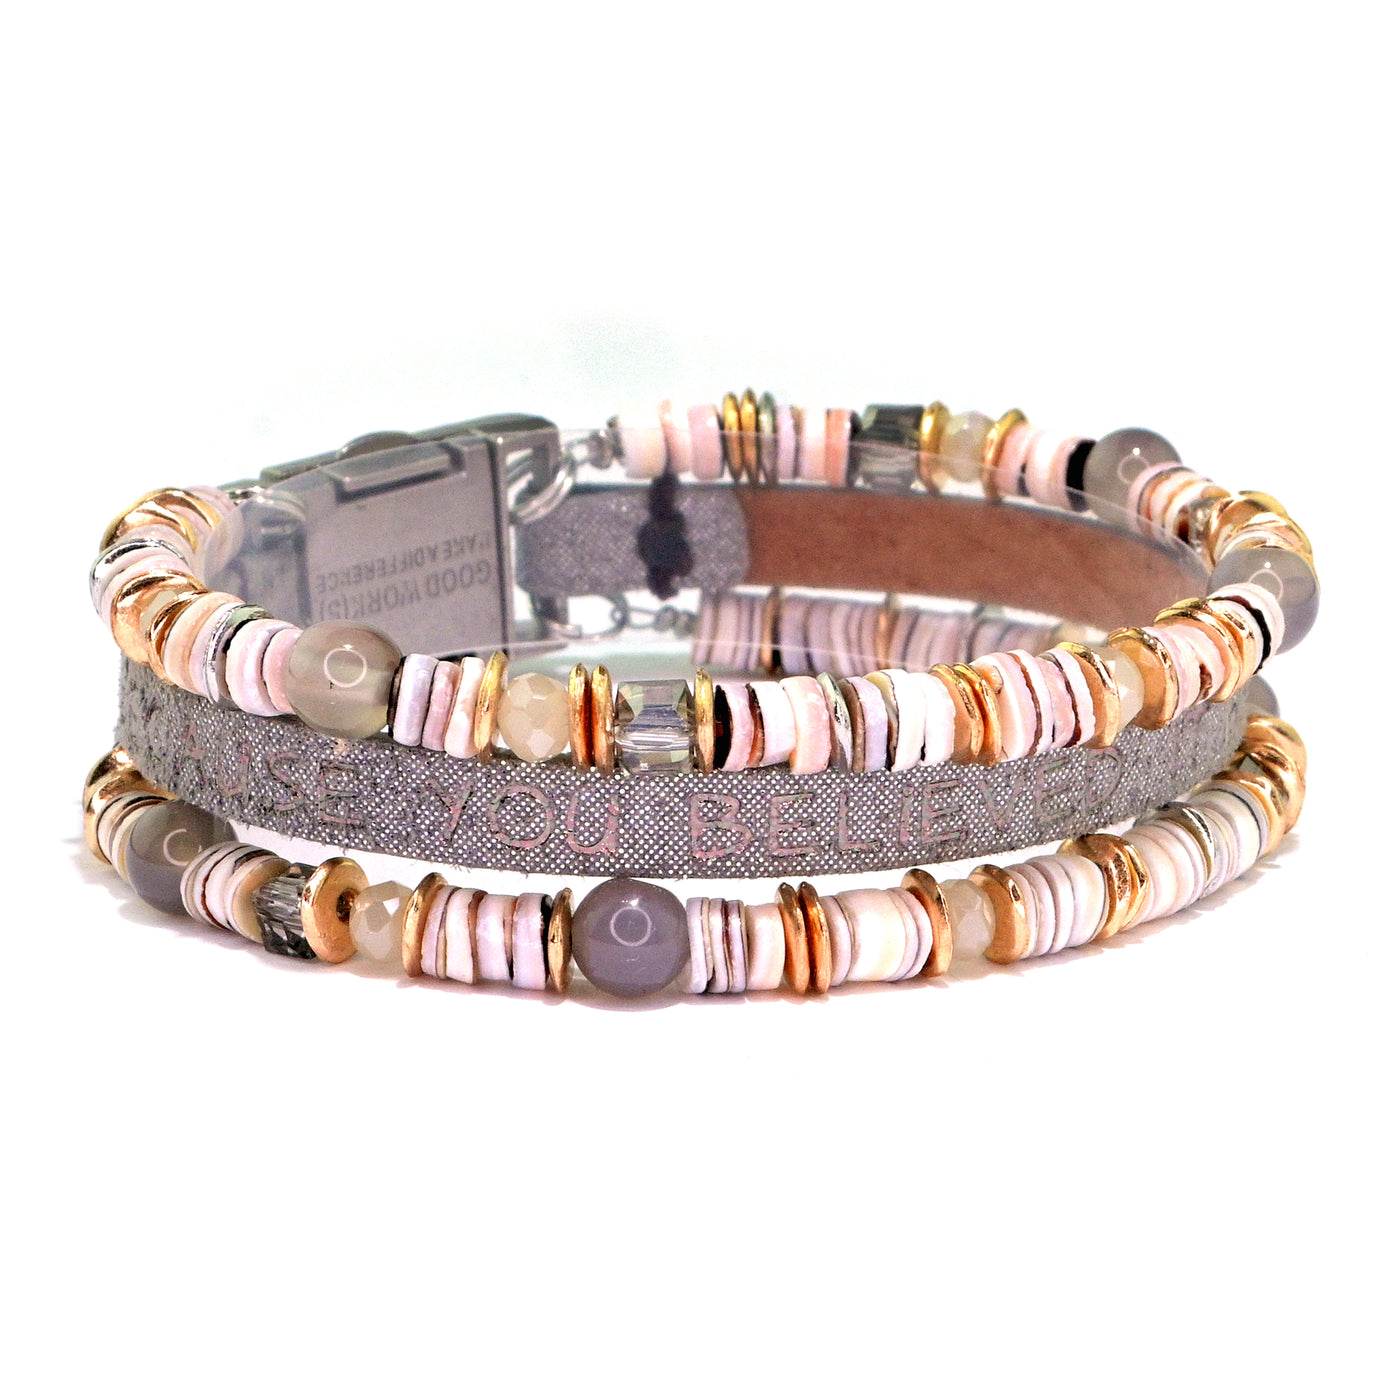 Tranquil Bracelet-Good Work(s) Make A Difference® | Christian and Inspirational Jewelry Company in Vernon, California